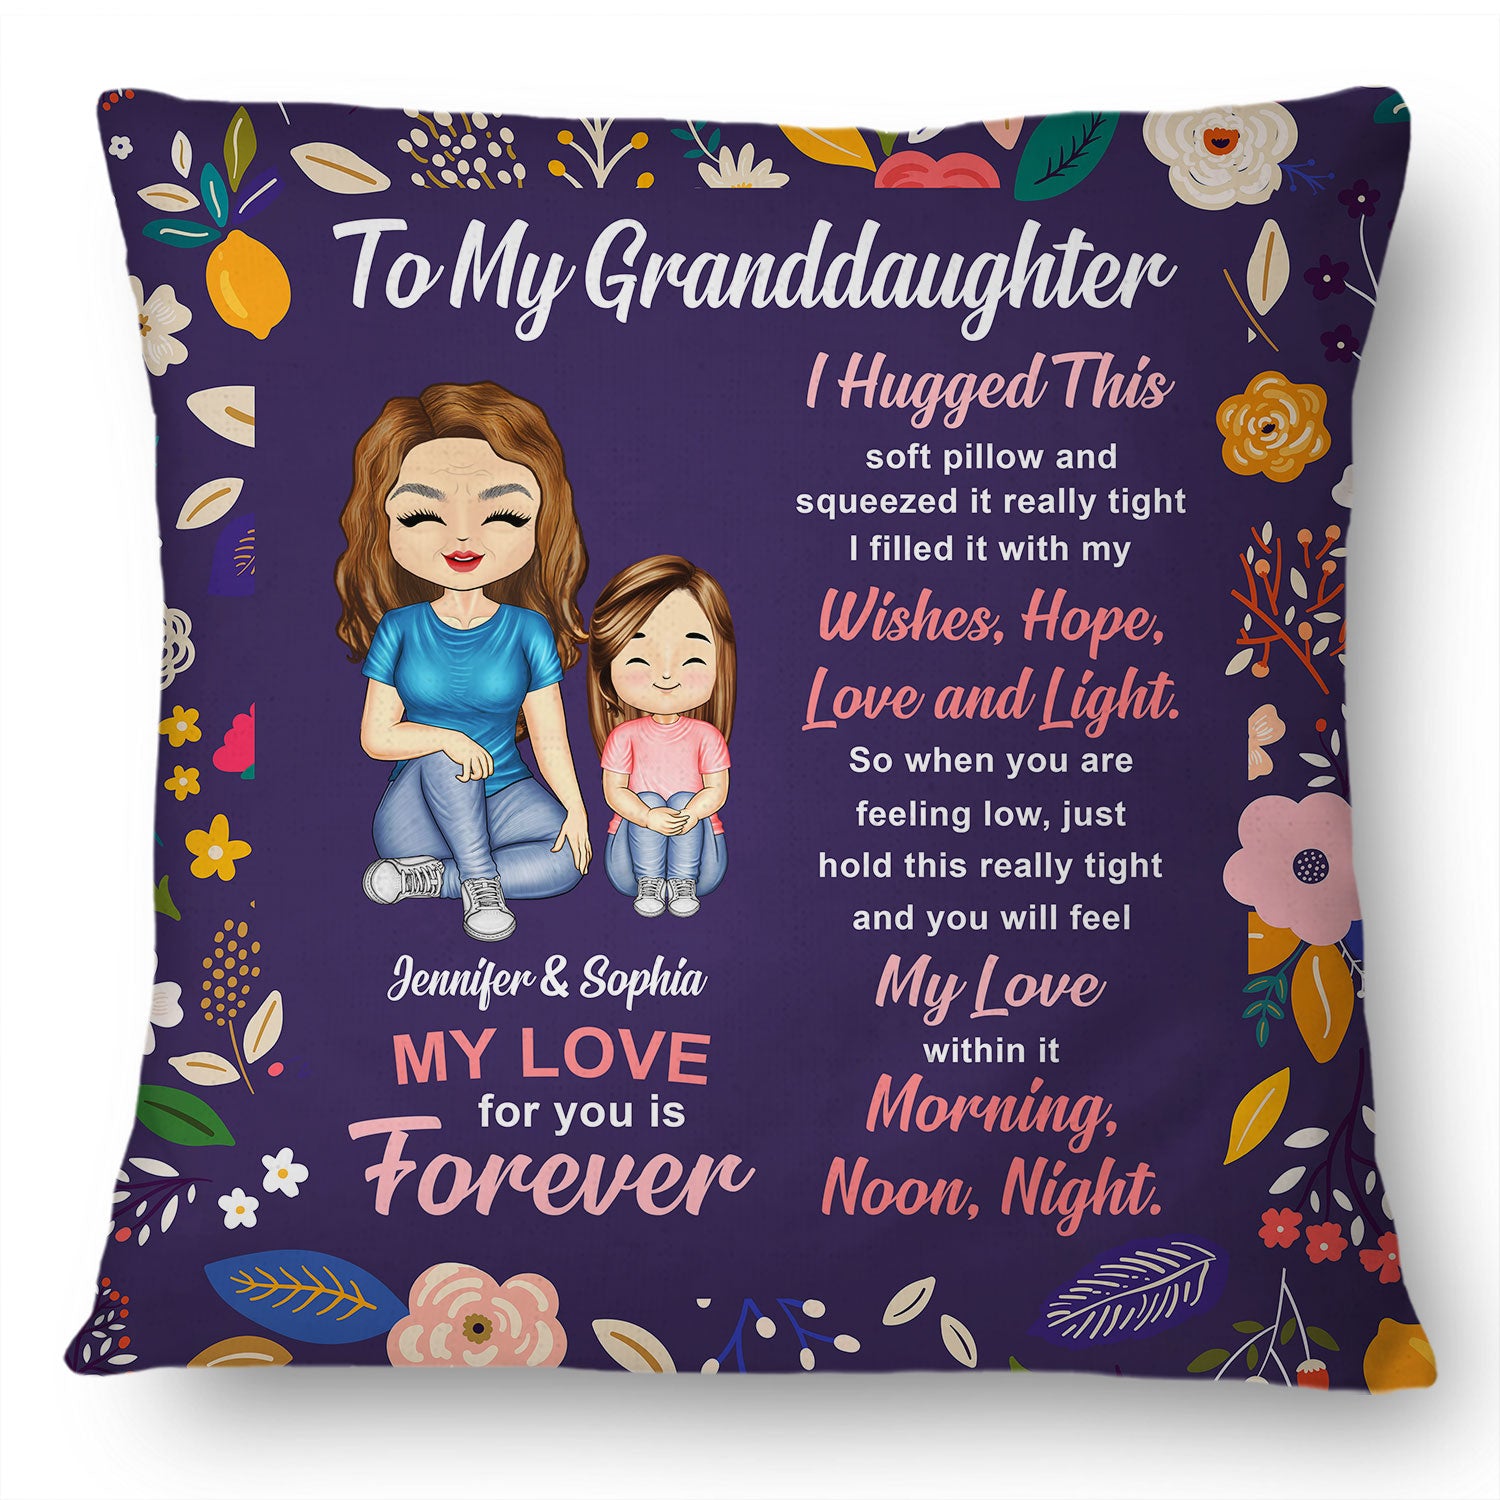 To My Granddaughter - Gift For Granddaughter, Grandparents Gift - Personalized Pillow